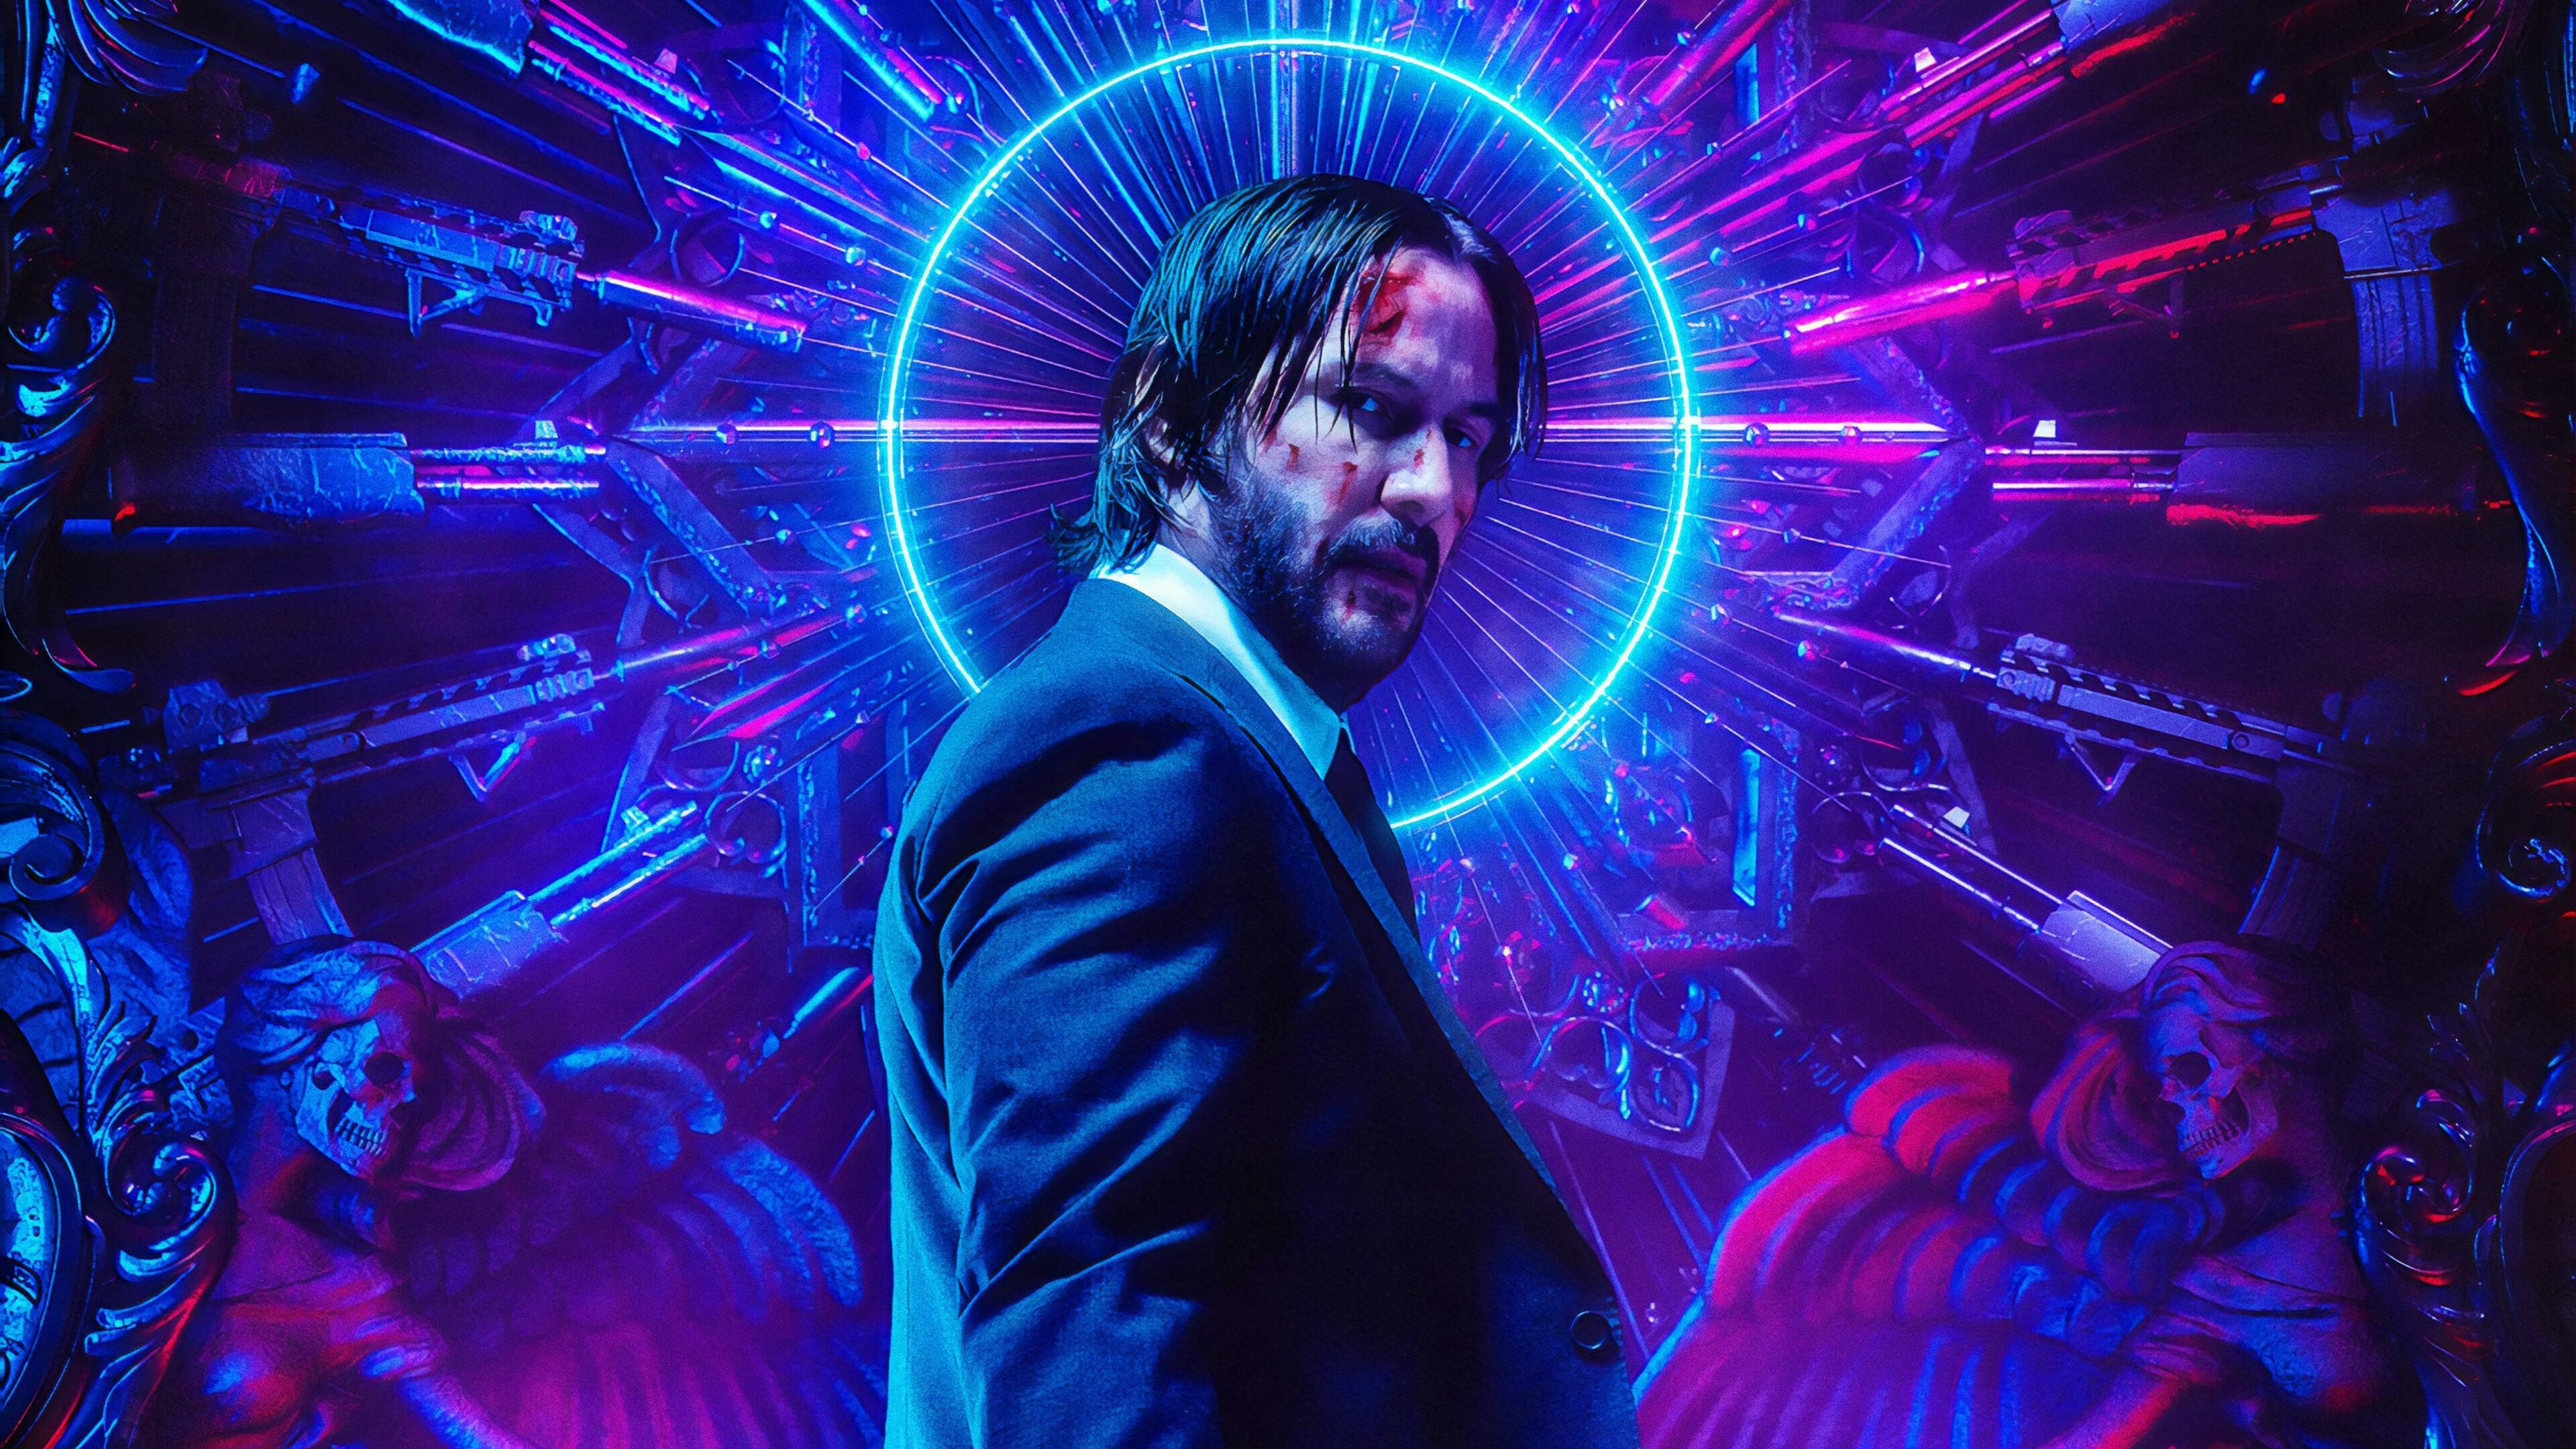 Keanu Reeves: An accomplished actor, John Wick film series. 3840x2160 4K Background.